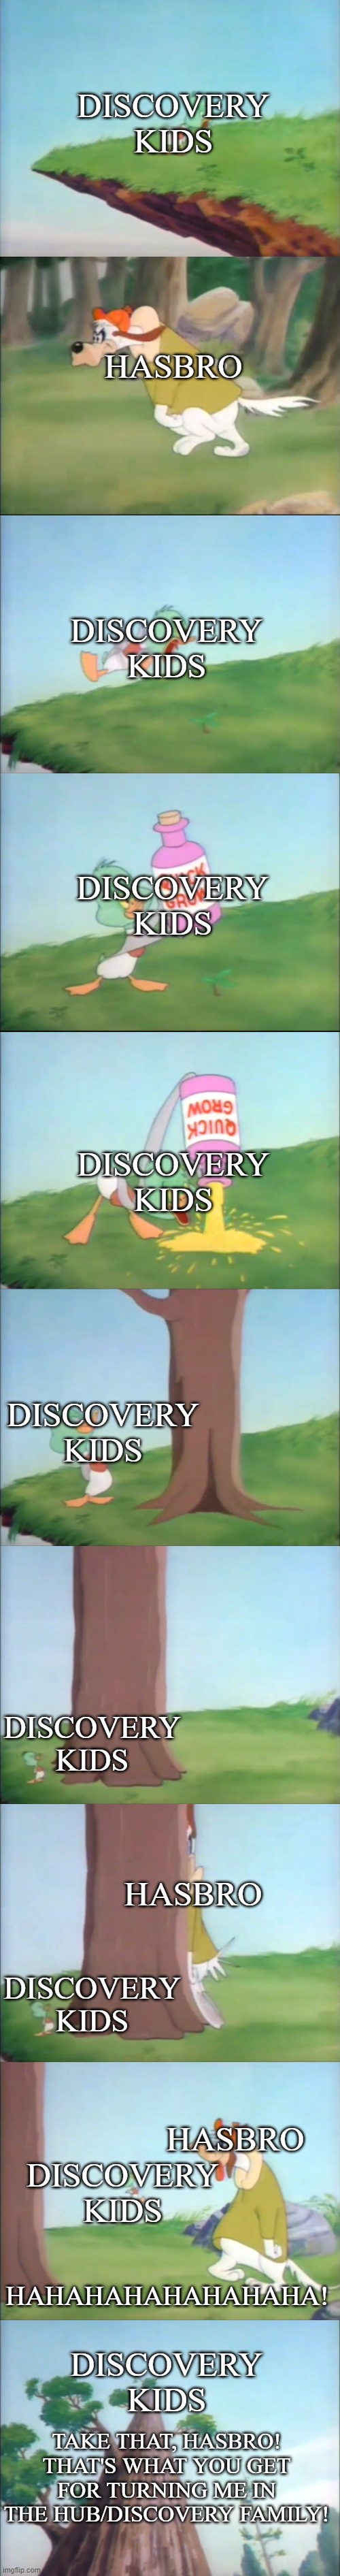 Take that, Hasbro! | DISCOVERY KIDS; HASBRO; DISCOVERY KIDS; DISCOVERY KIDS; DISCOVERY KIDS; DISCOVERY KIDS; DISCOVERY KIDS; HASBRO; DISCOVERY KIDS; HASBRO; DISCOVERY KIDS; HAHAHAHAHAHAHAHA! DISCOVERY KIDS; TAKE THAT, HASBRO! THAT'S WHAT YOU GET FOR TURNING ME IN THE HUB/DISCOVERY FAMILY! | image tagged in discovery kids,hasbro,funny memes | made w/ Imgflip meme maker